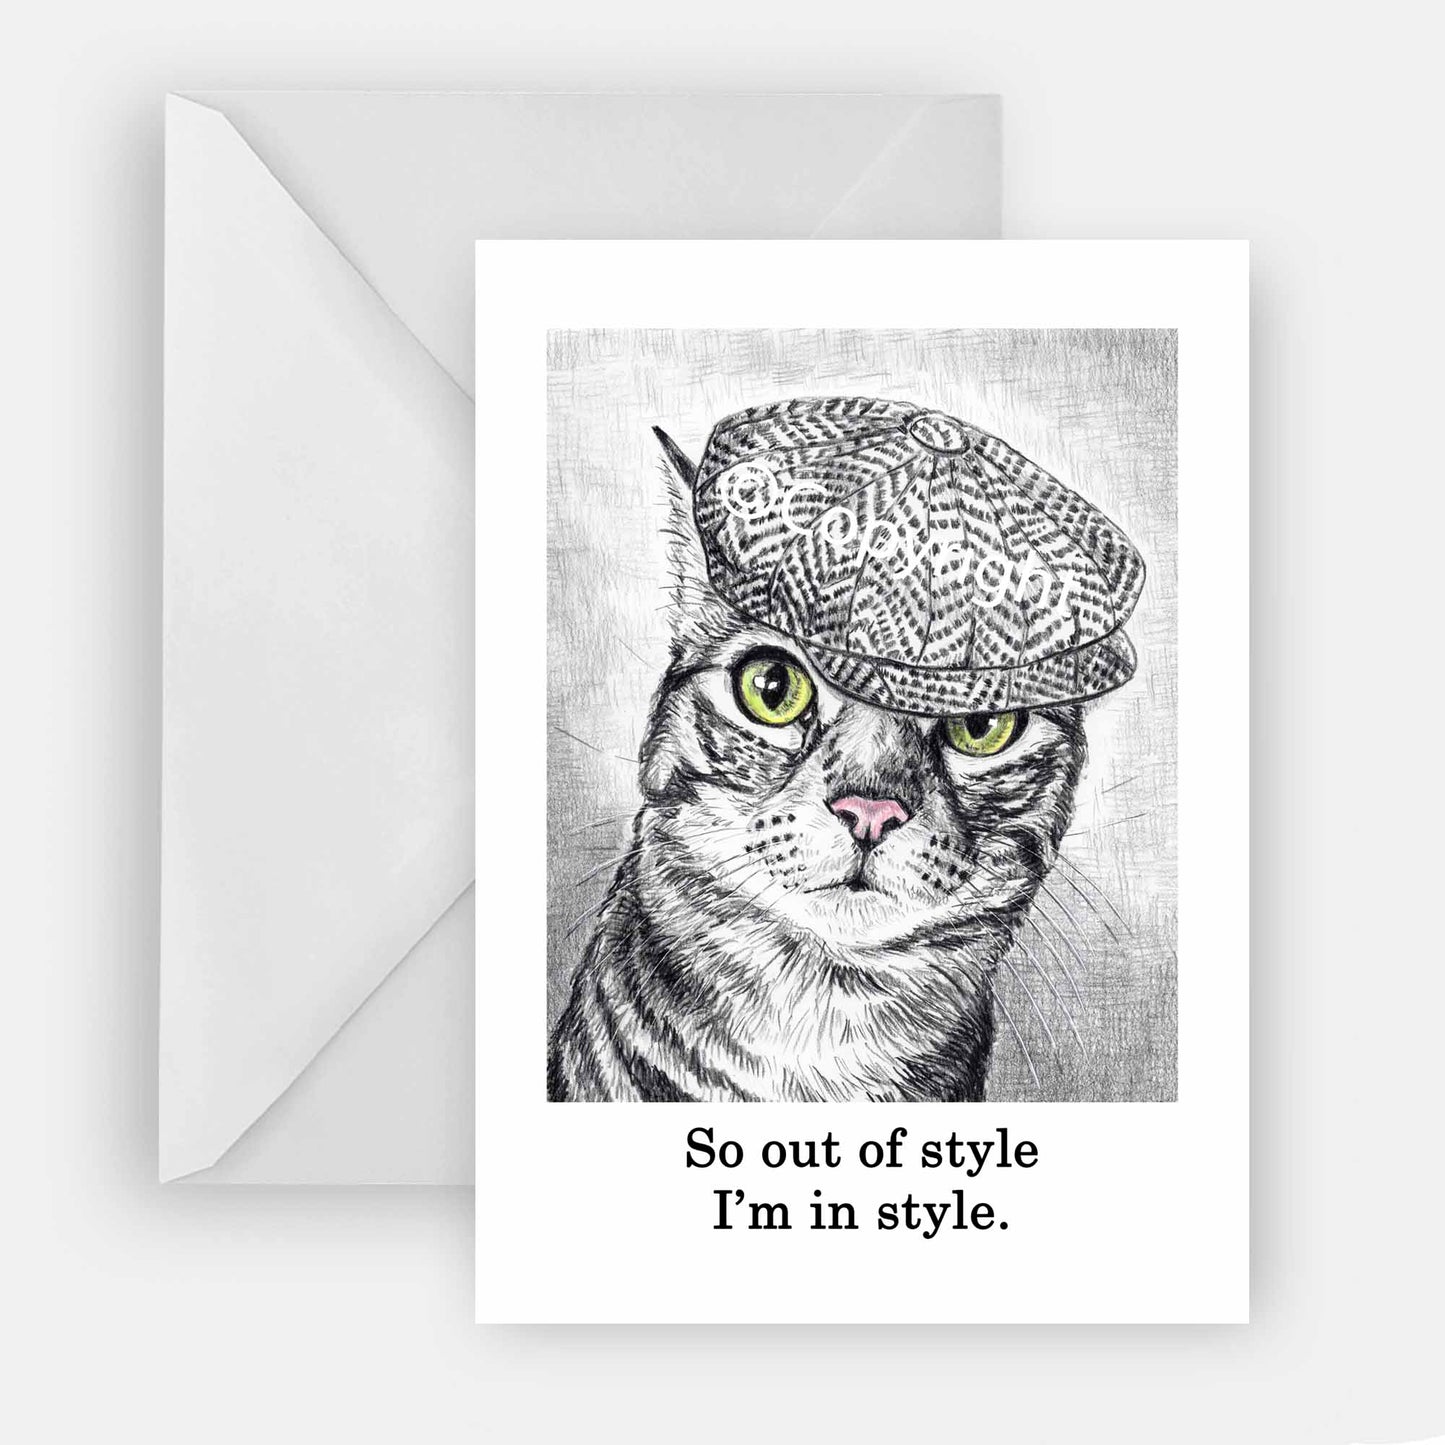 Blank greeting card featuring a black and white wax pastel drawing of tabby cat wearing a cap. Art by Deidre Wicks